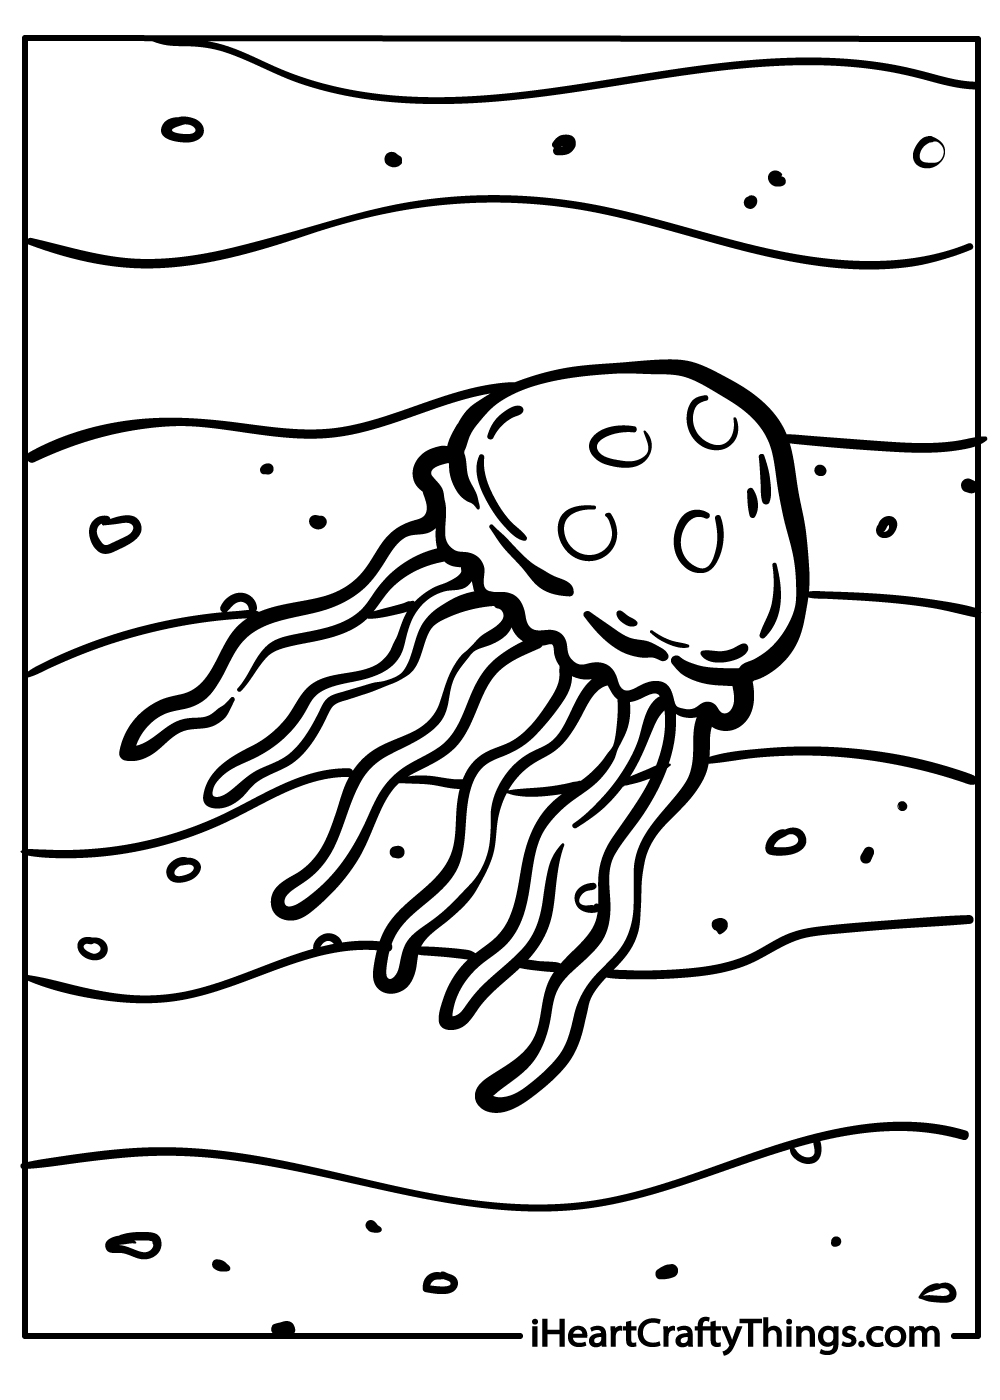 new sea creatures coloring sheet free download